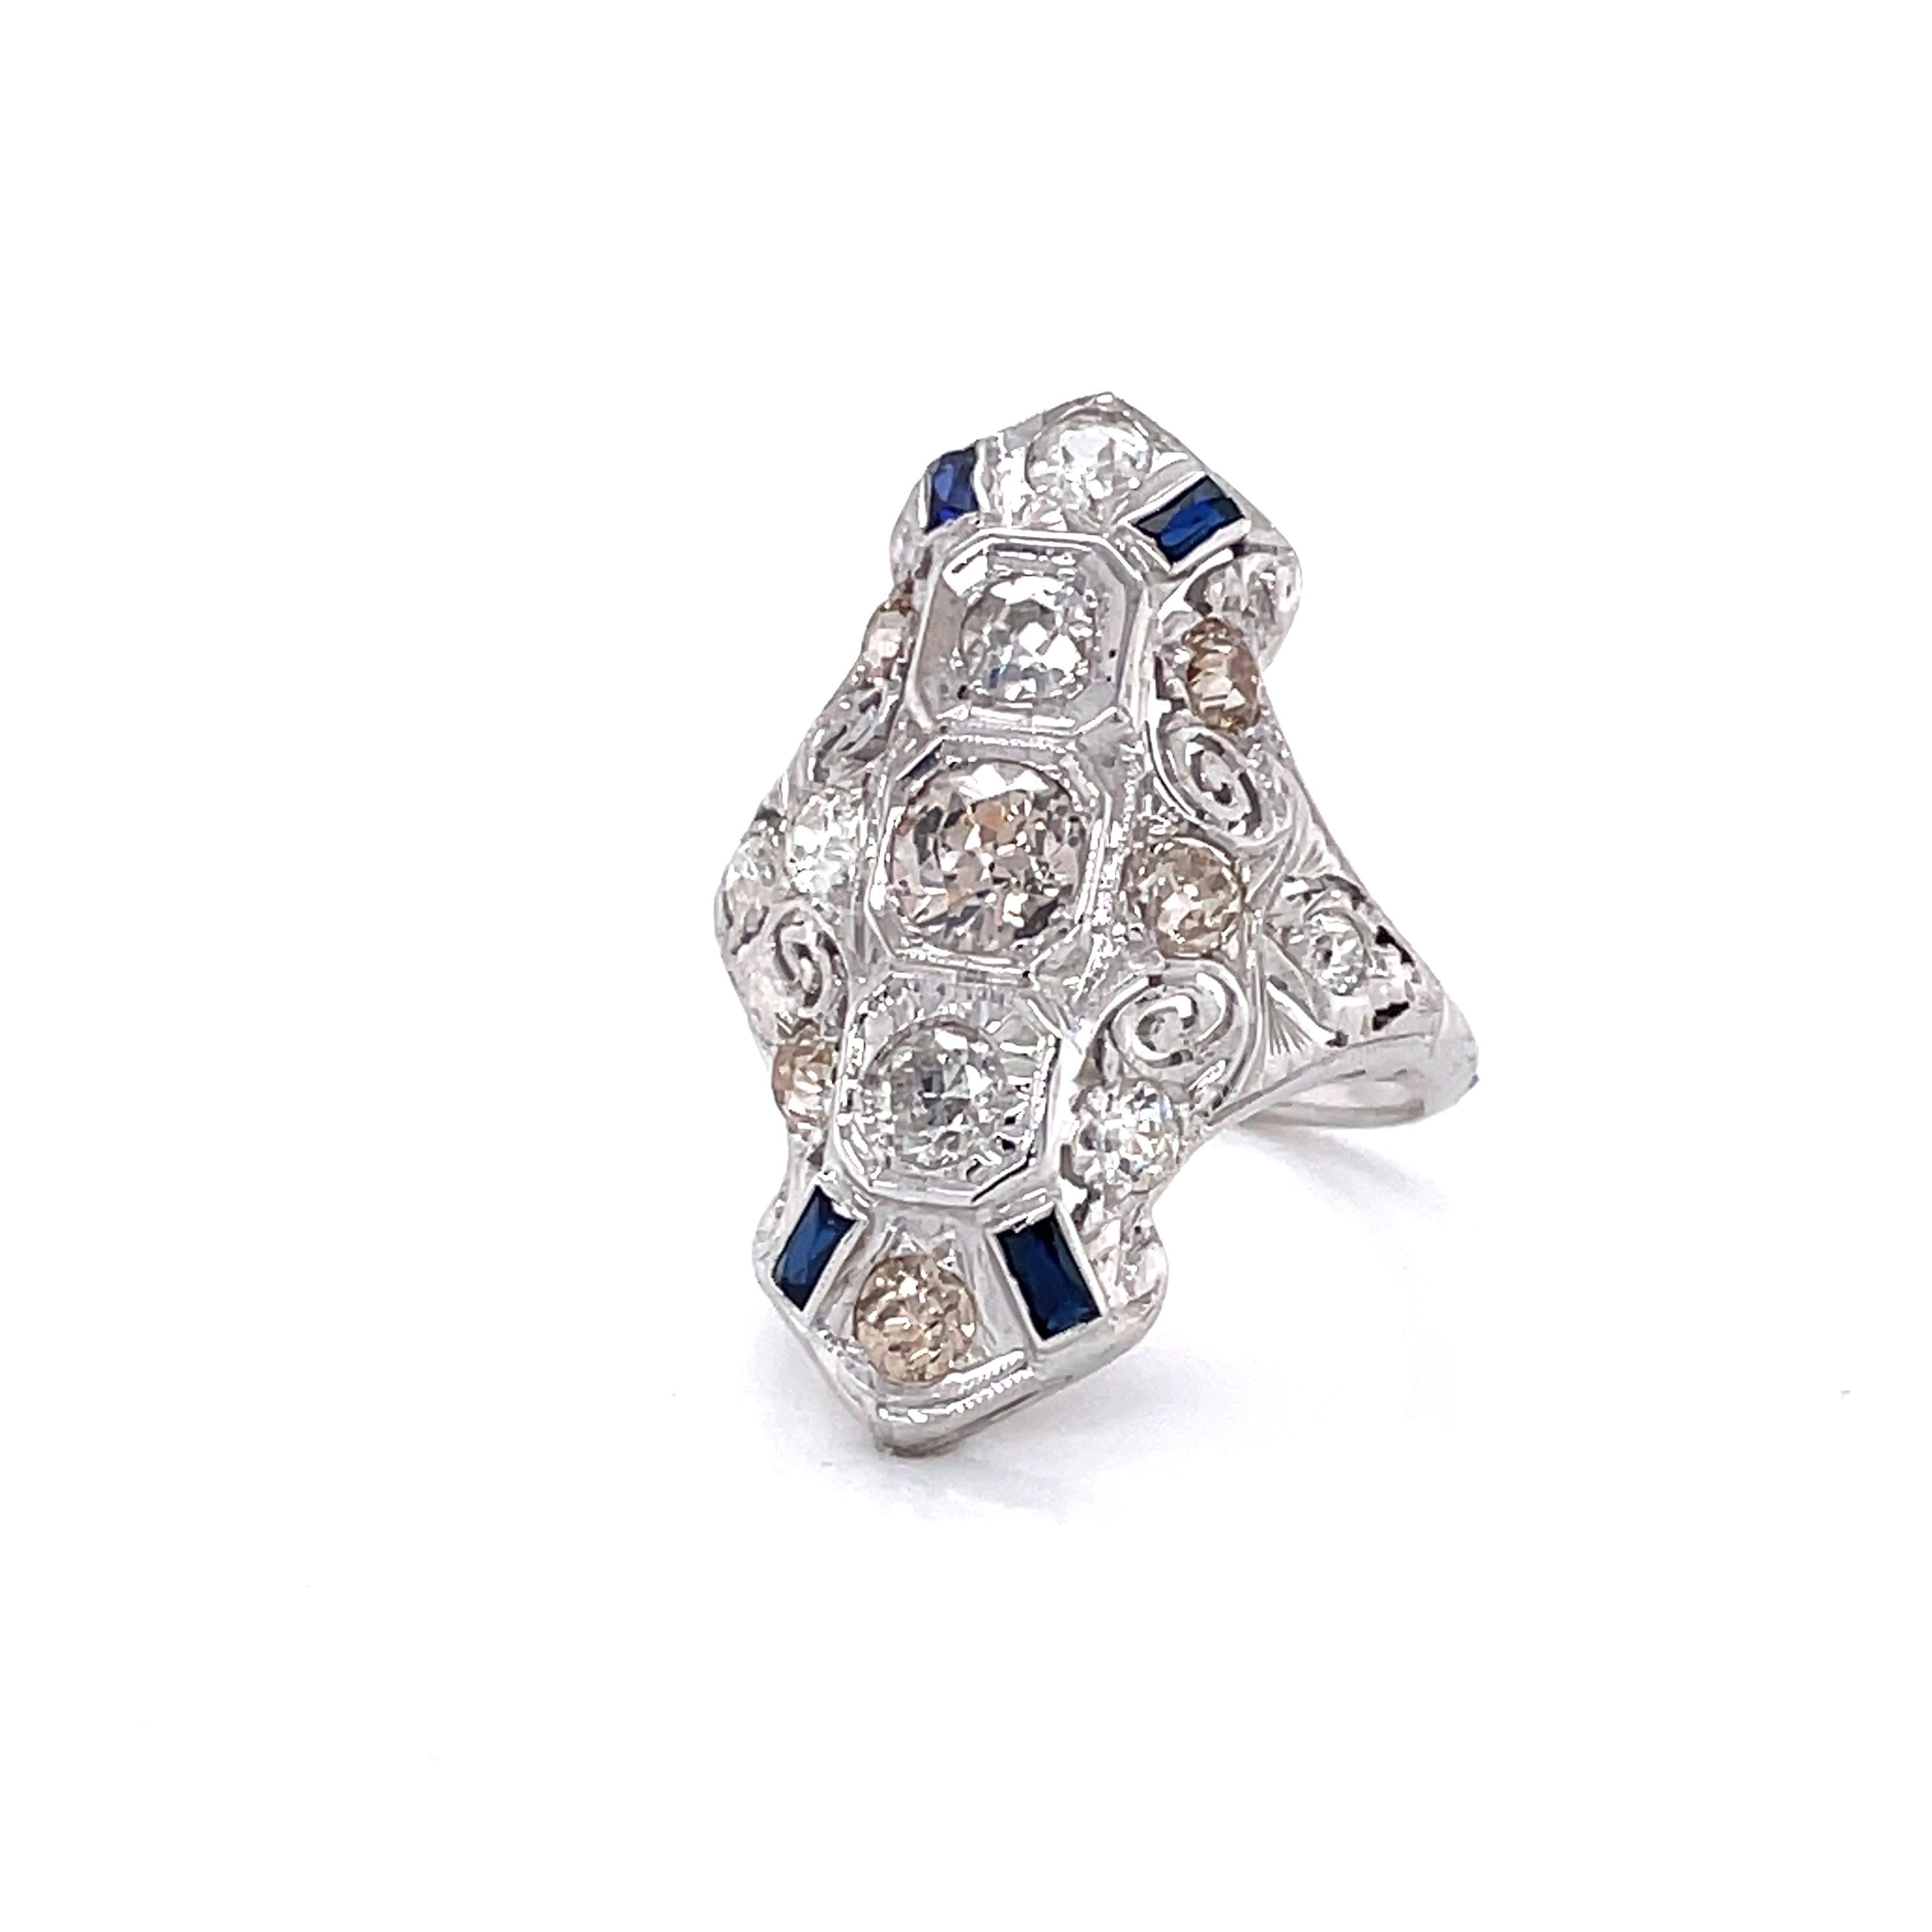 Diamond Blue Sapphire Edwardian 14 Karat White Gold Filigree Ring In Good Condition For Sale In Mount Kisco, NY